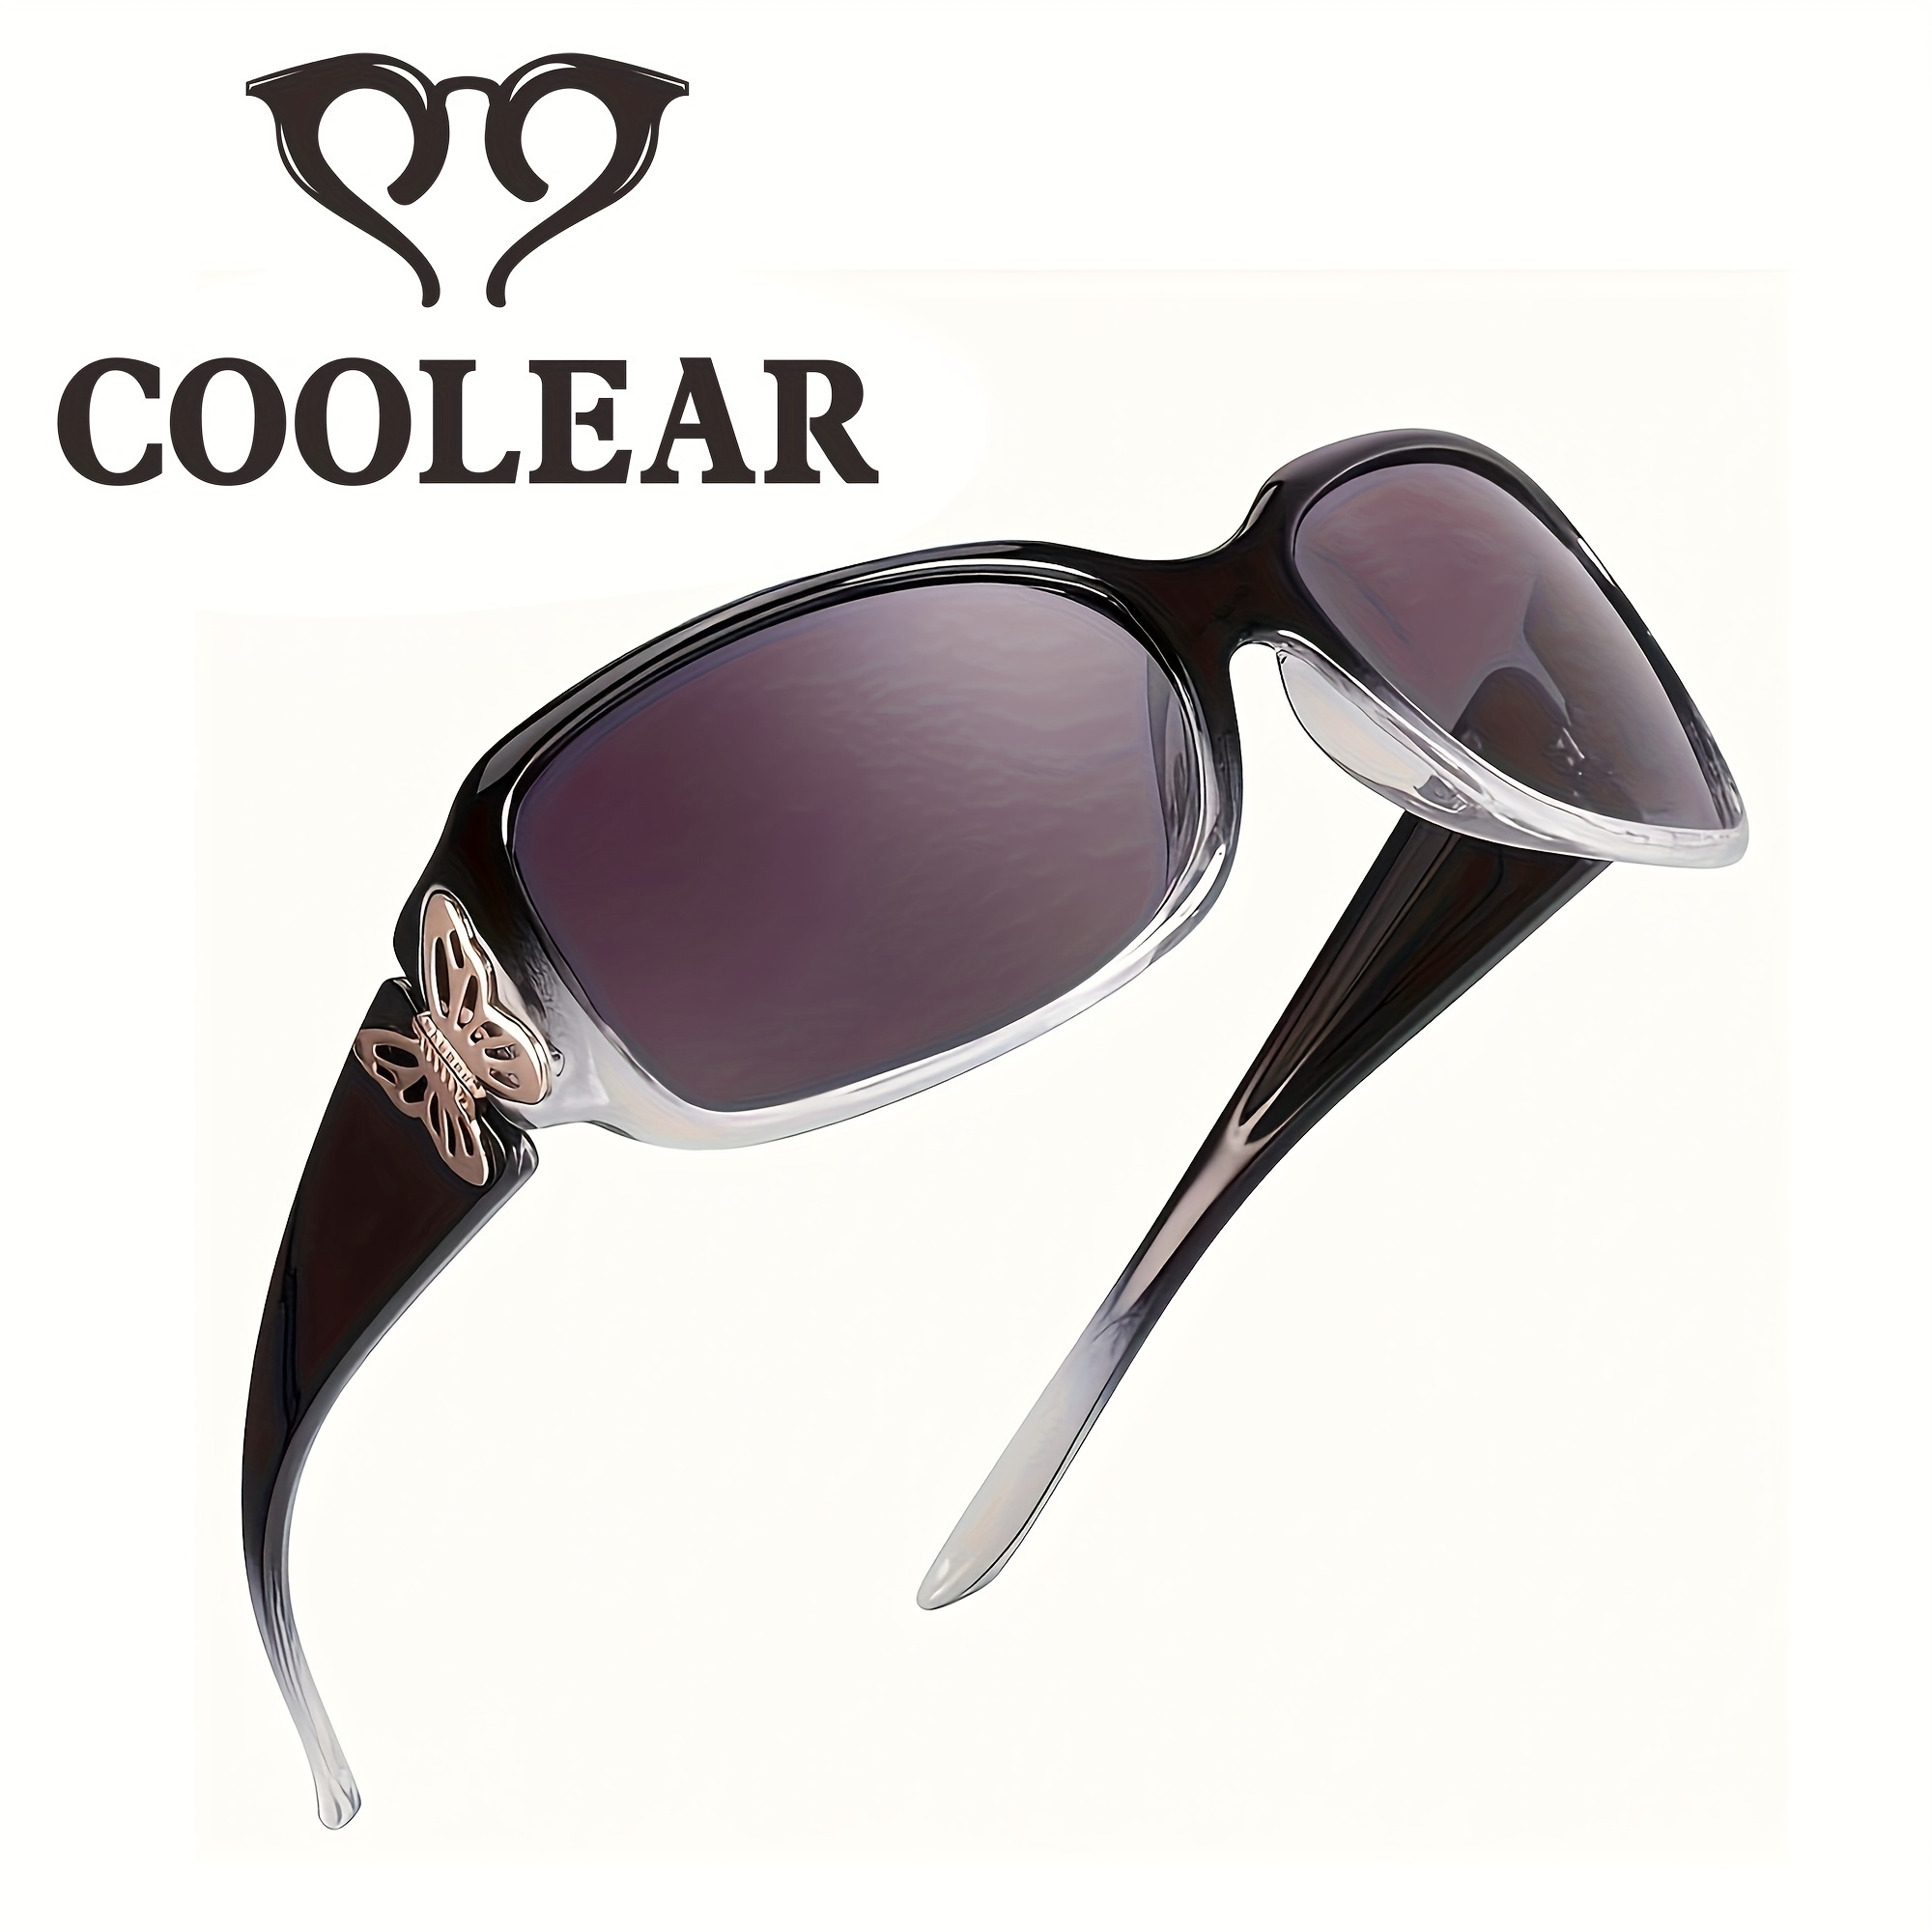 

Coolear Sunglasses For Women Polarized Uv400 Protection Wrap Around Glasses Trendy Butterfly Decor Fashion Accessories